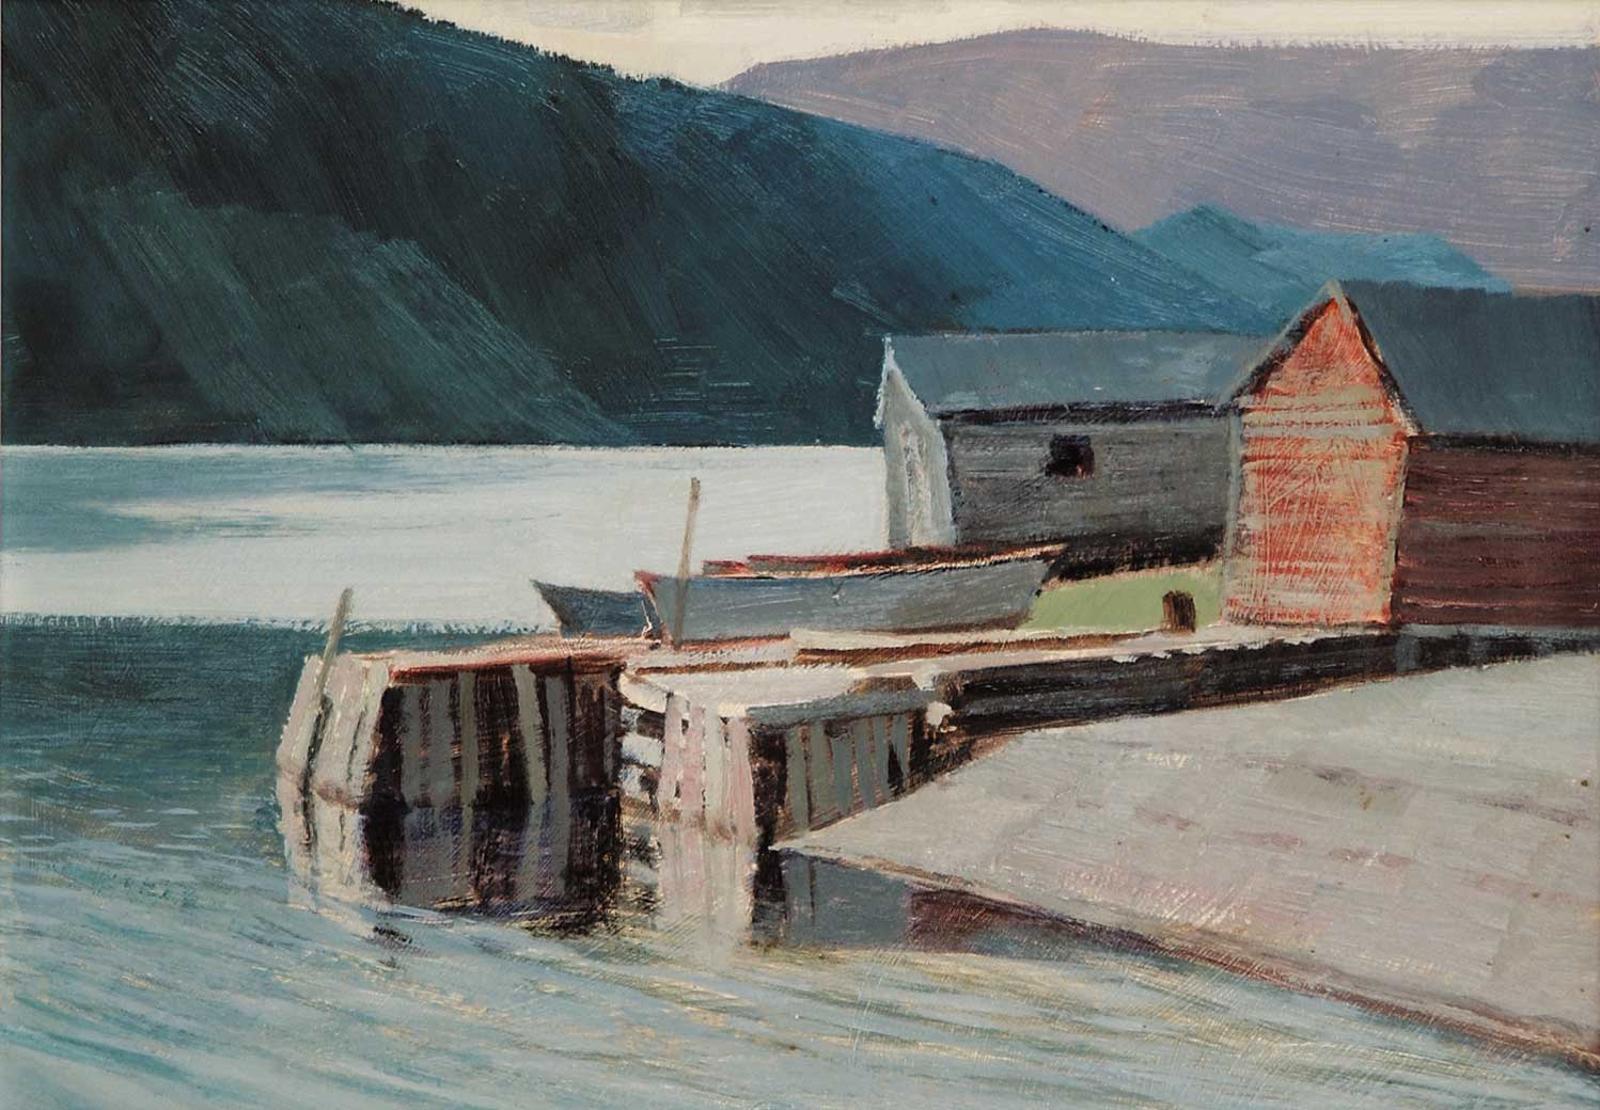 Alan Caswell Collier (1911-1990) - Norris Point Bonne Bay, Newfoundland